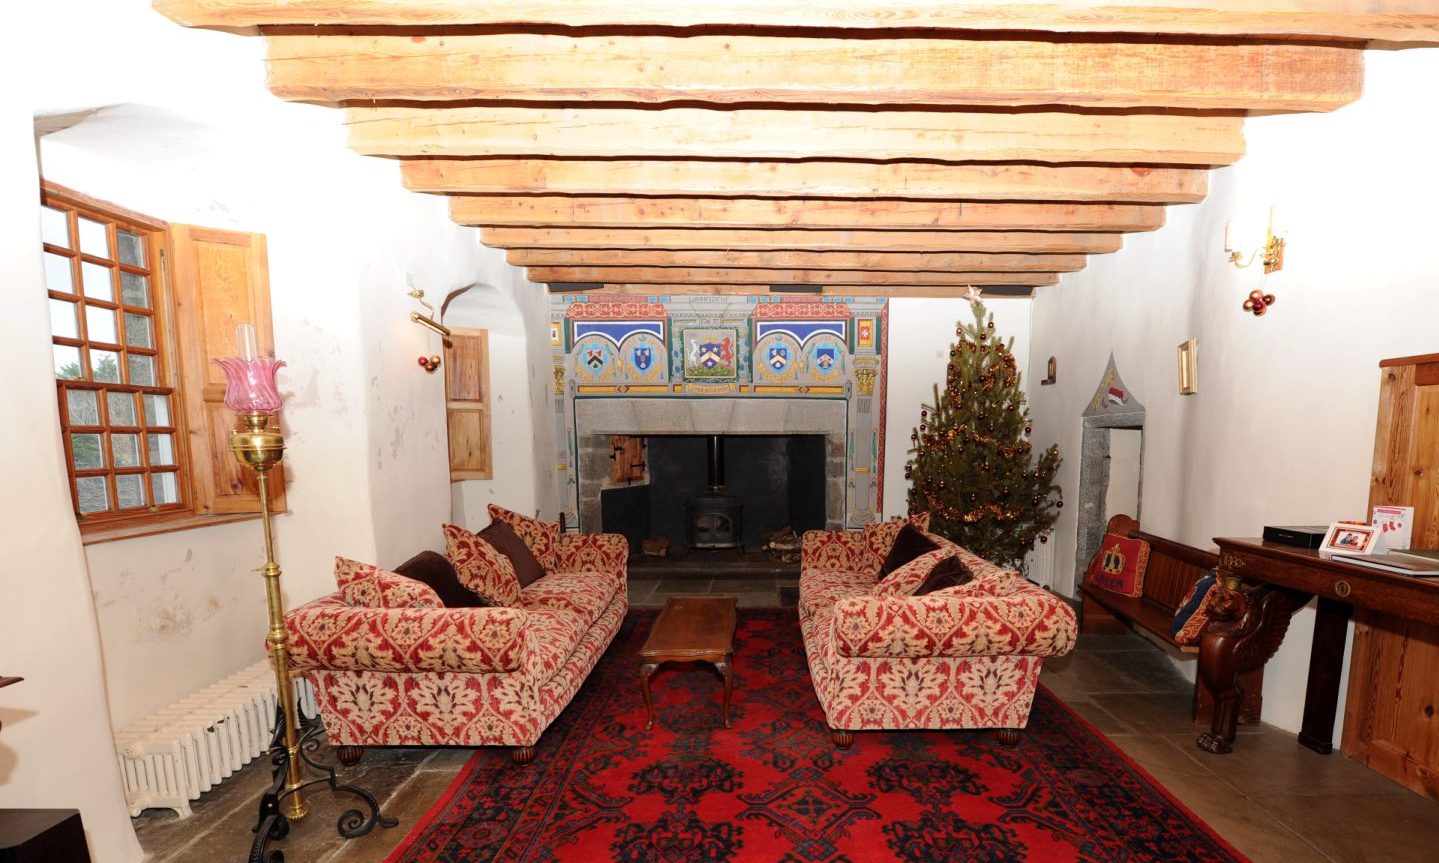 Inside a living area of the abode, with red and gold patterned sofas, a wooden coffee table, a wooden bench and a stone fireplace with clan crests above it